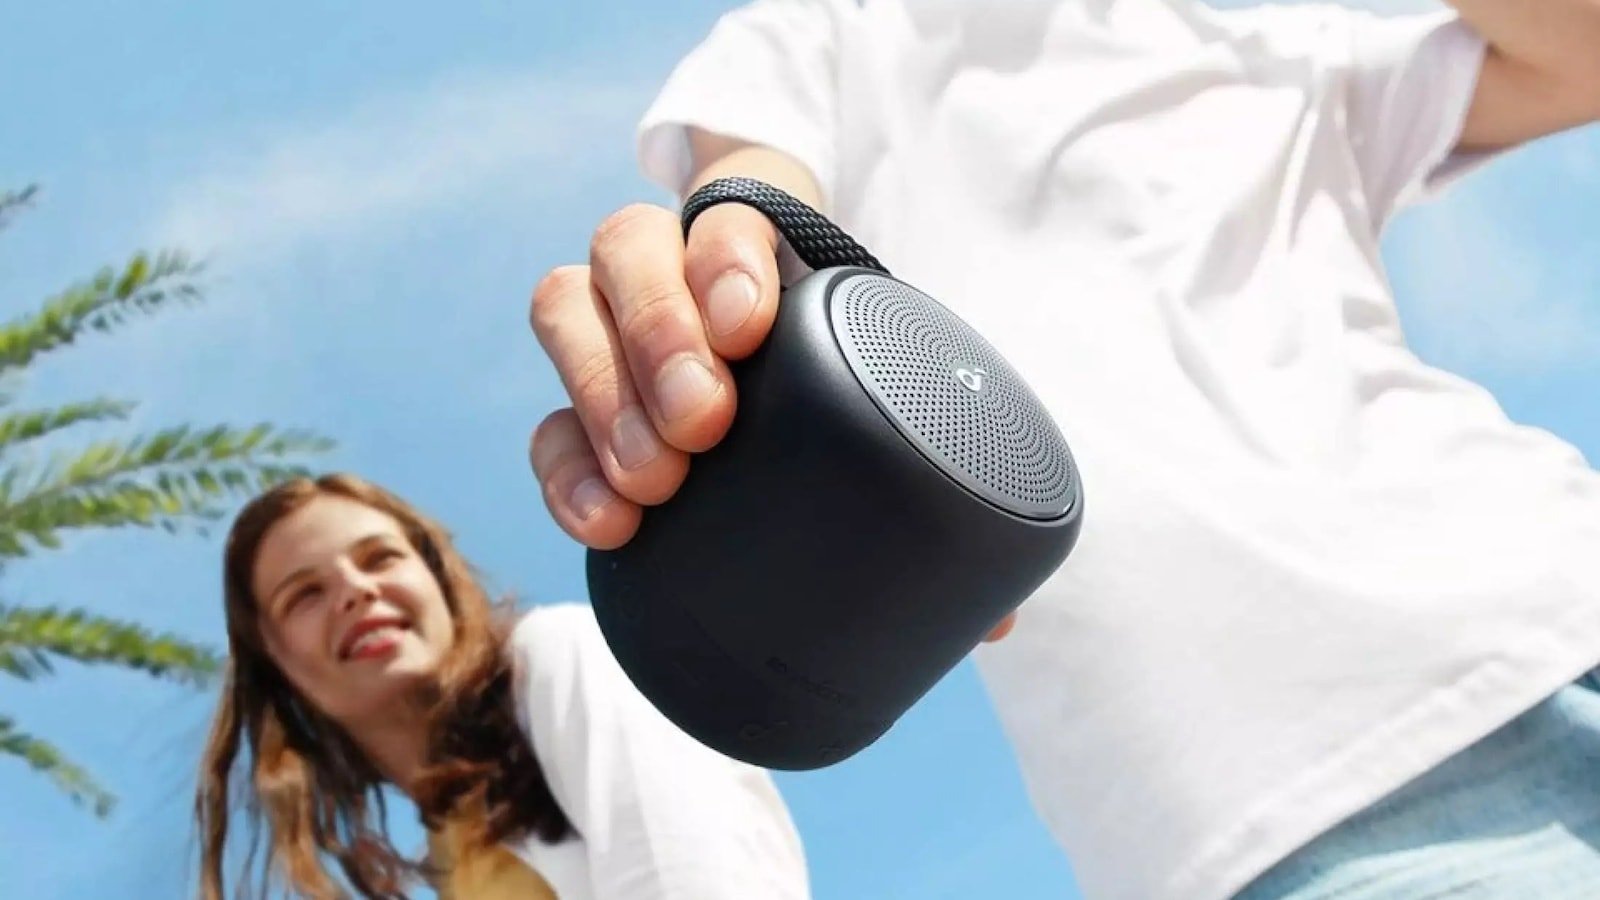 Soundcore Mini 3 palm-size speaker gives you 360° of audio in a cup-size form factor